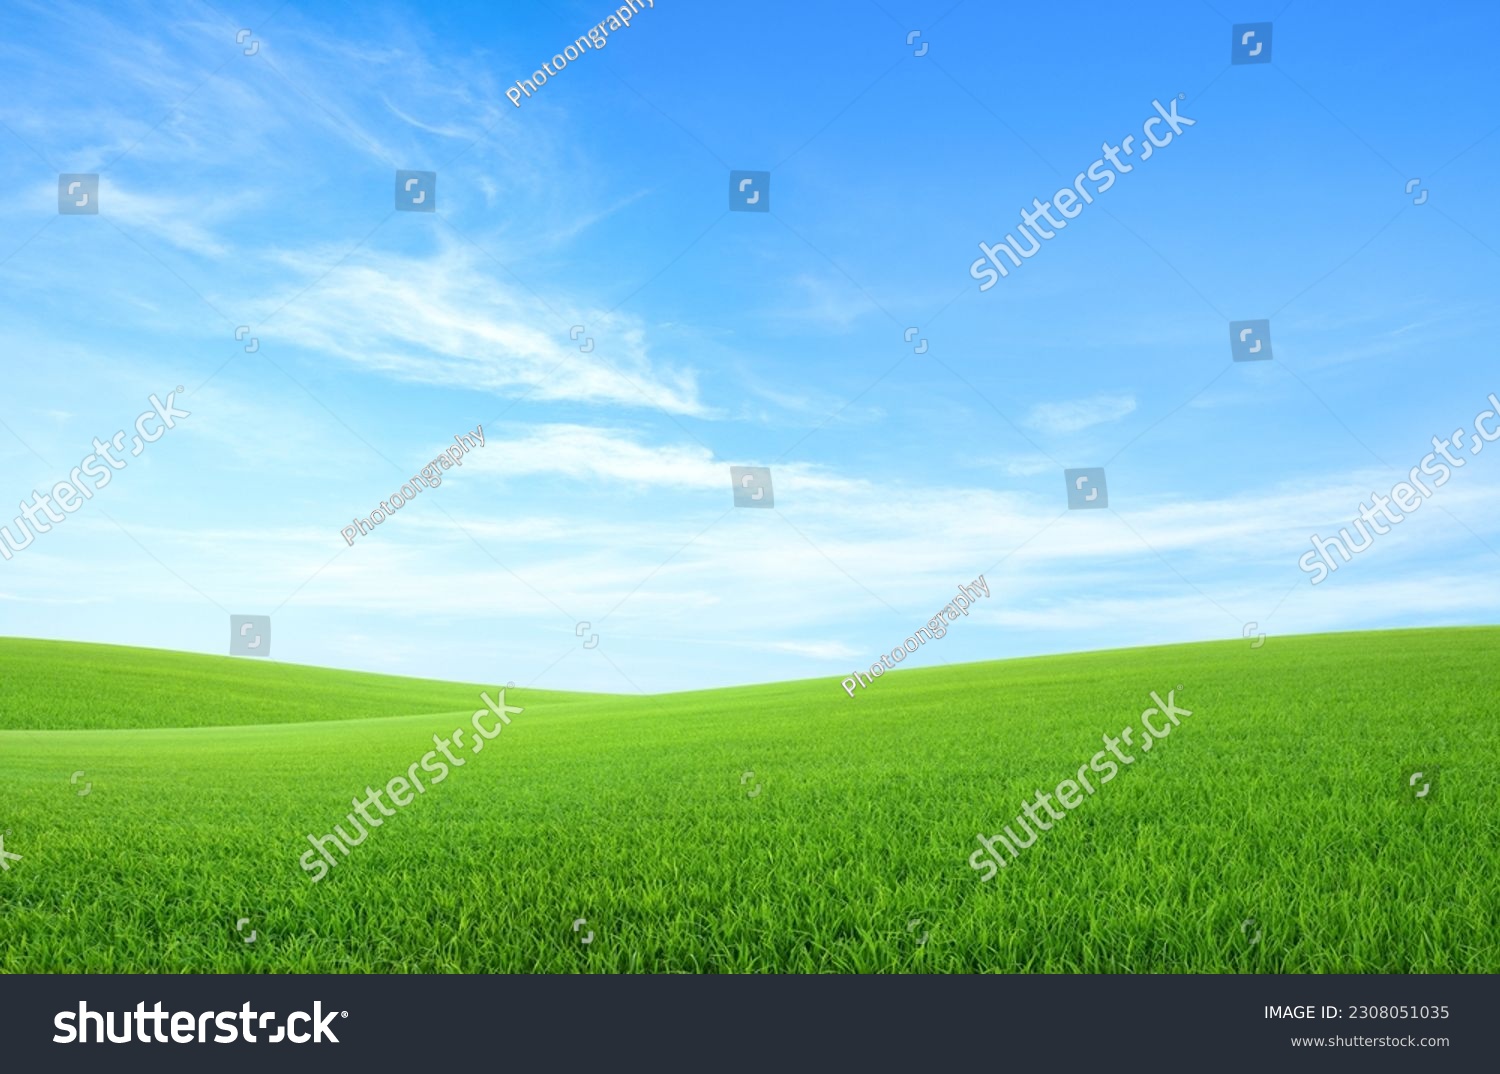 Landscape view of green grass field with blue skybackground. #2308051035